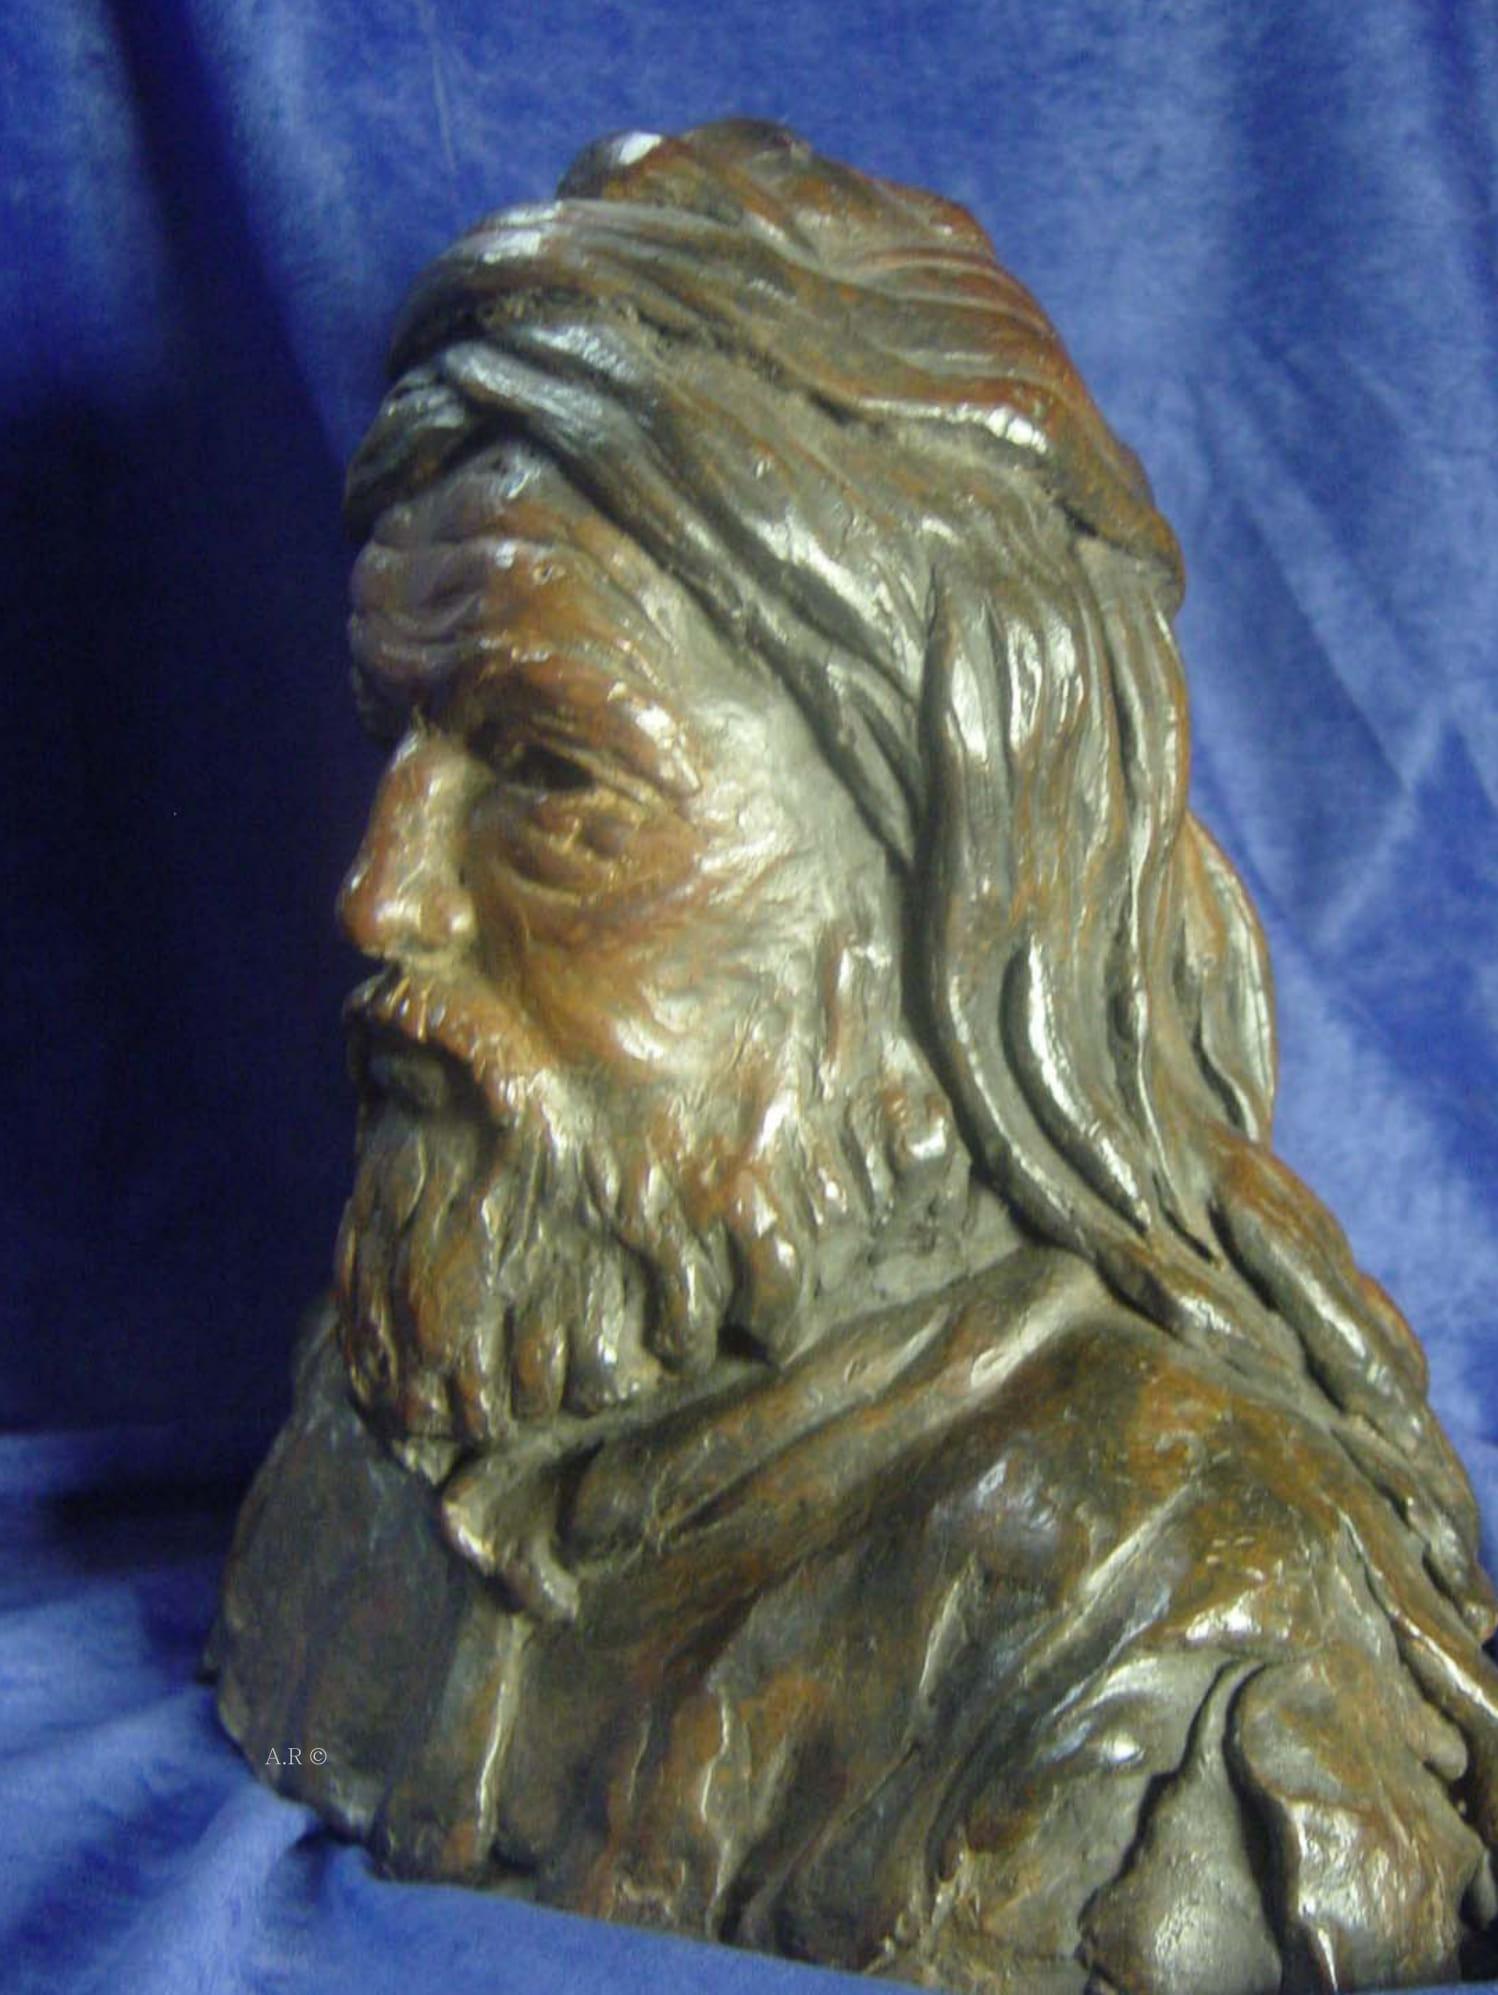 Rembrandt in Bronze - "Bust of an Old Man with Turban", unique etching sculpture